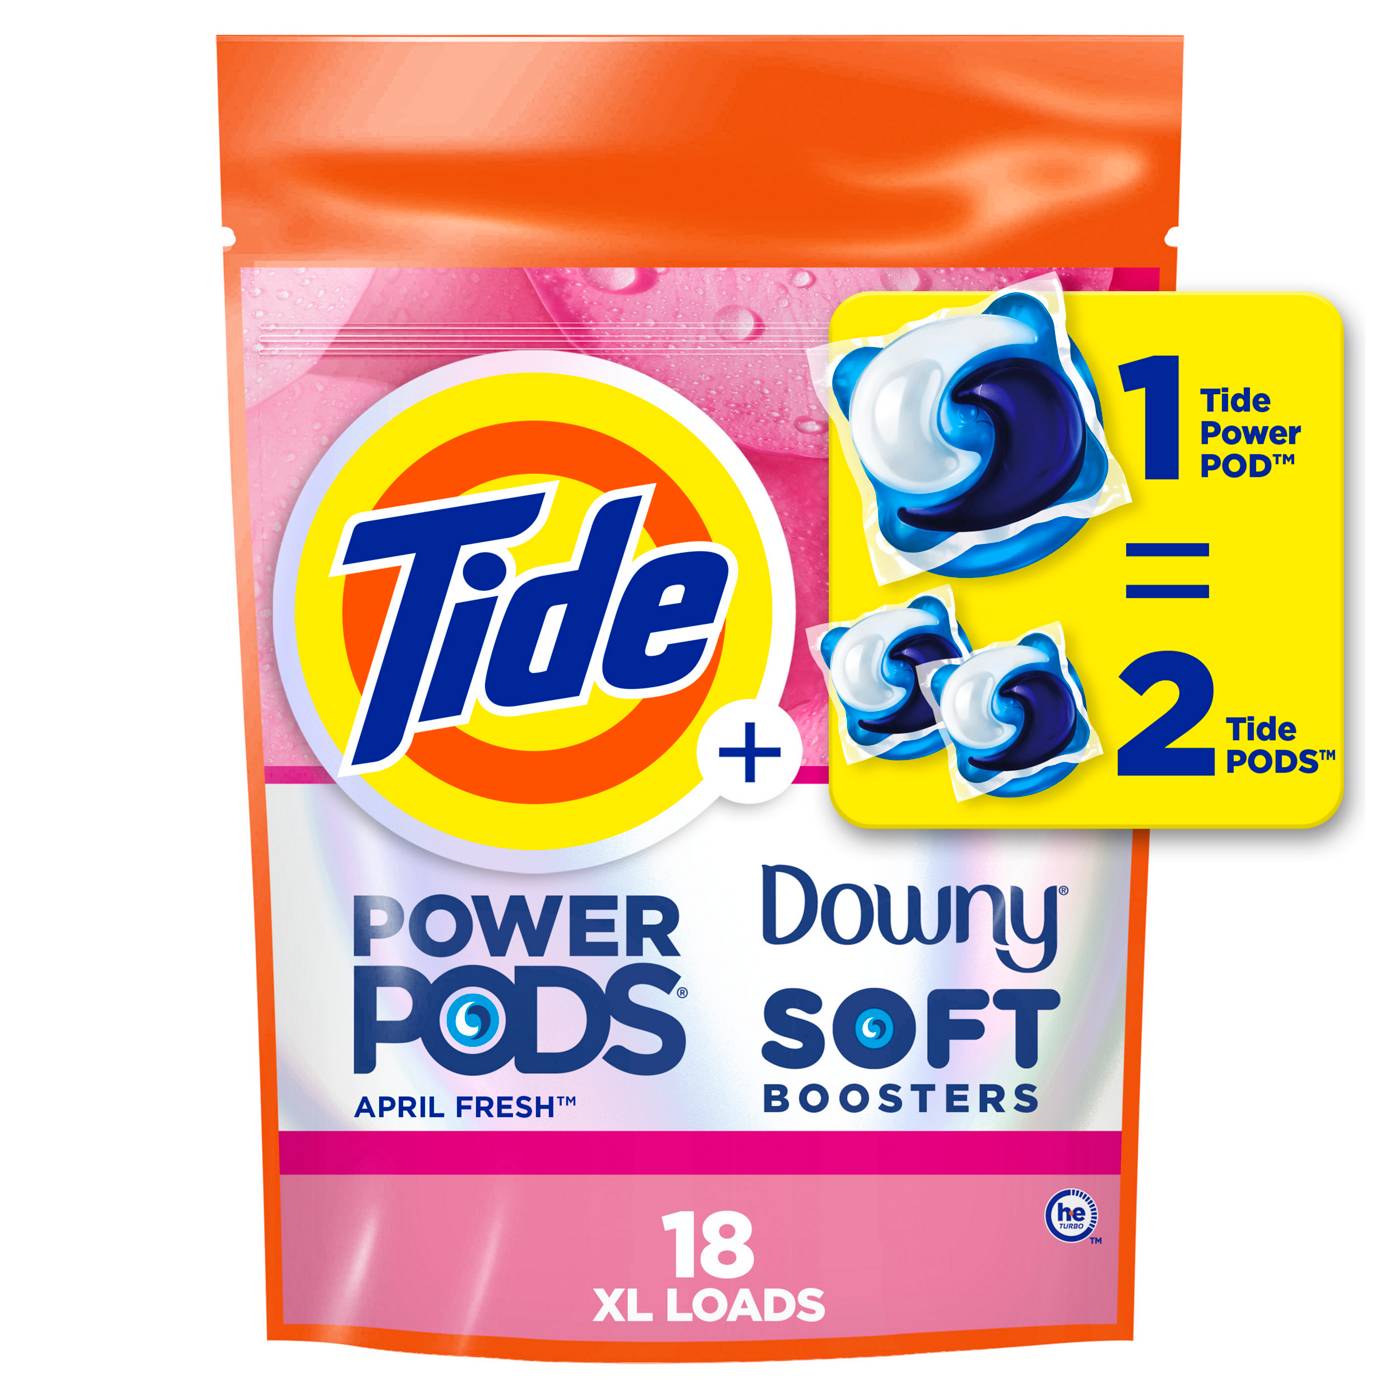 Tide Power Pods + Downy Soft Boosters HE Laundry Detergent - April Fresh; image 1 of 7